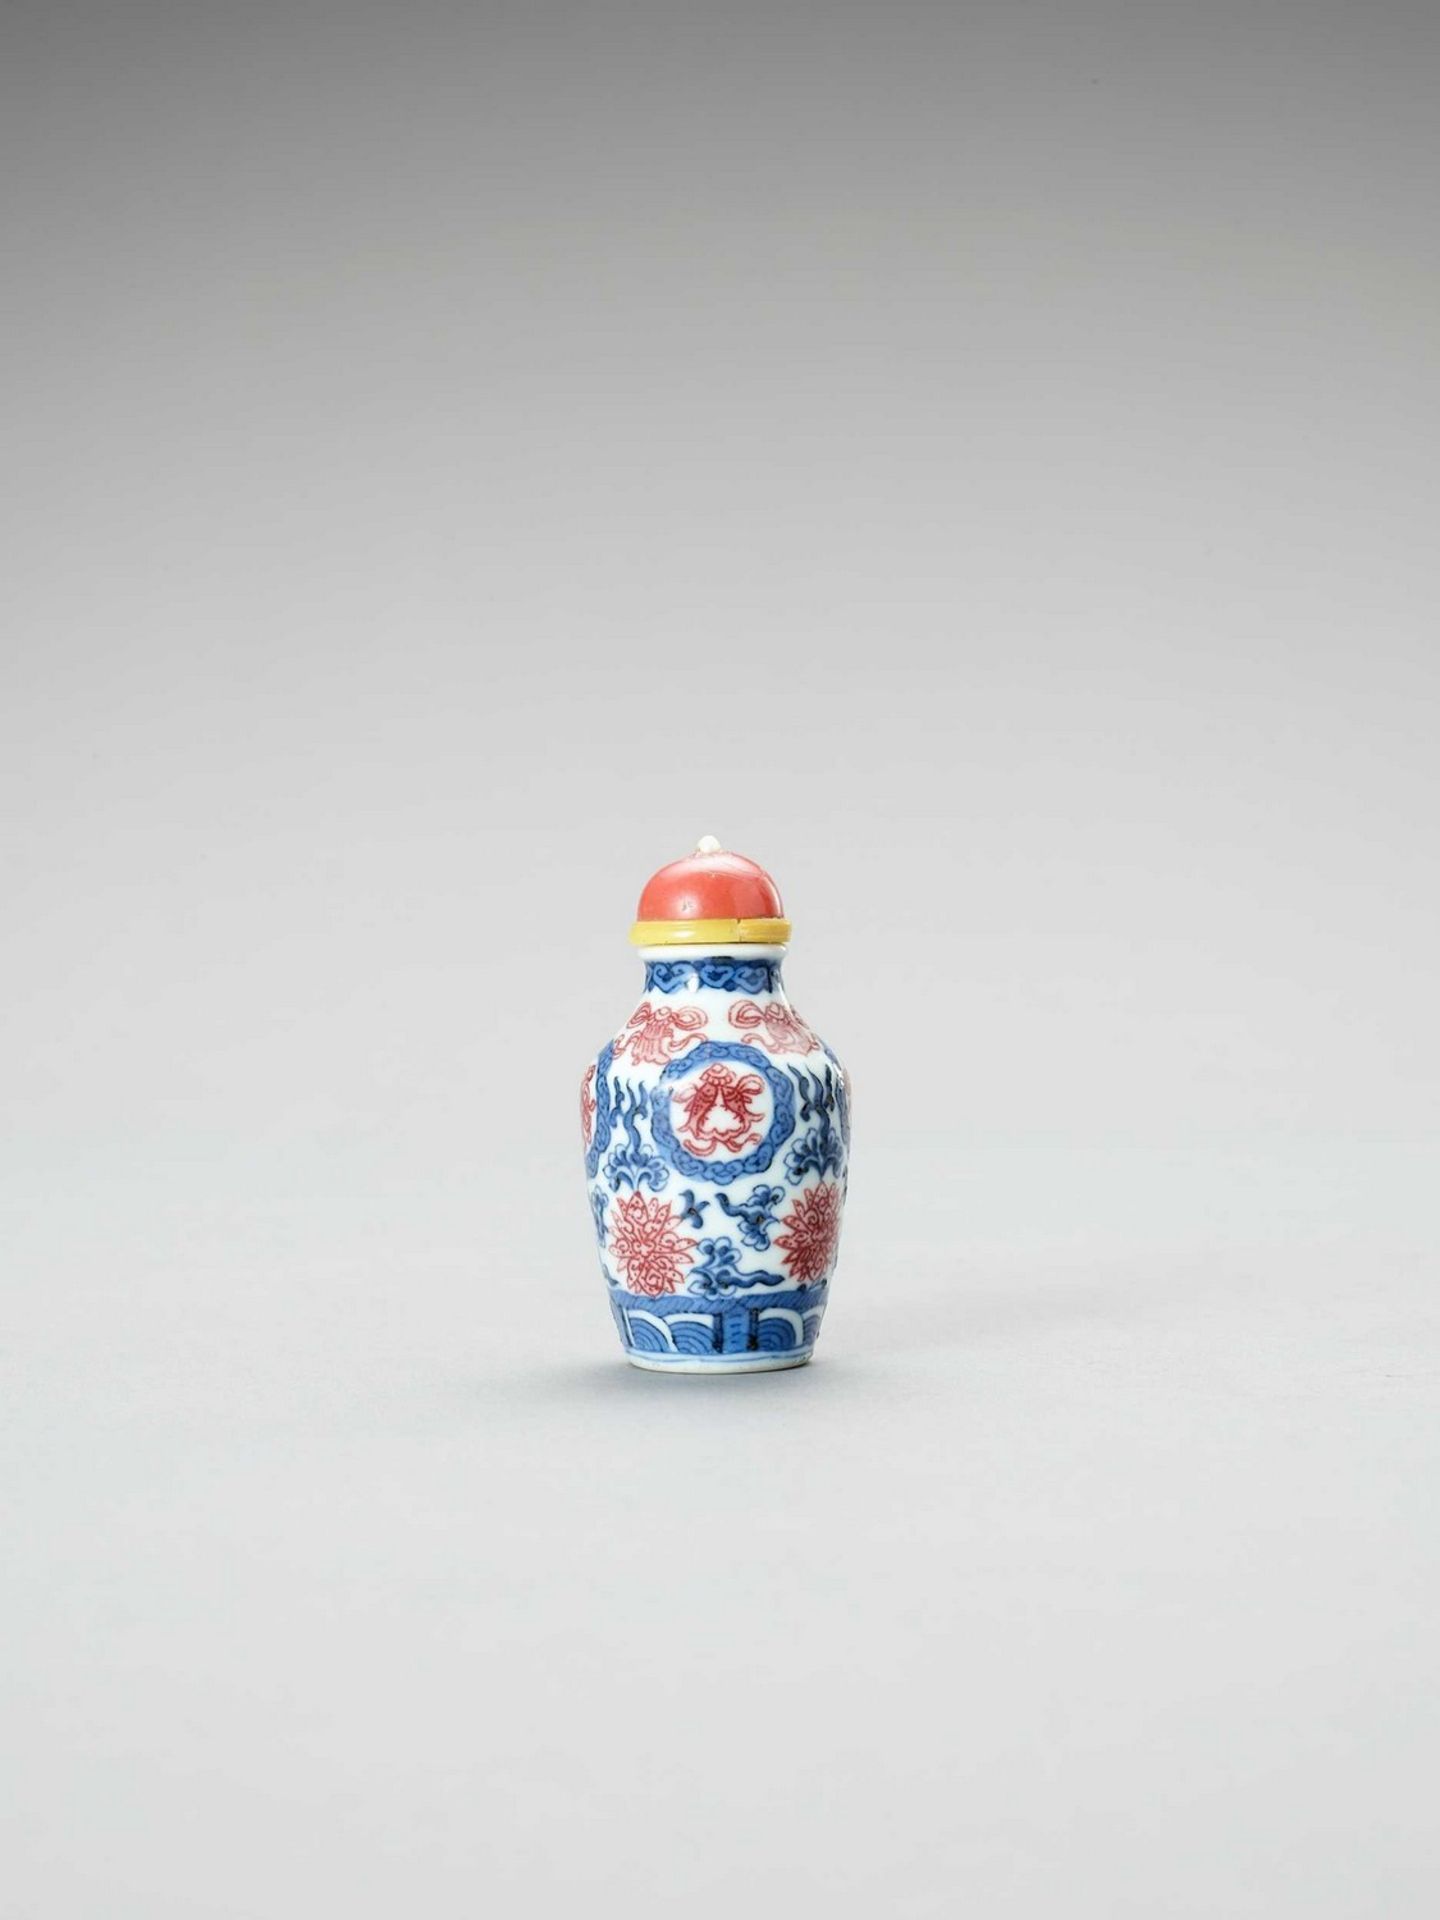 AN IRON-RED, BLUE AND WHITE PORCELAIN SNUFF BOTTLE